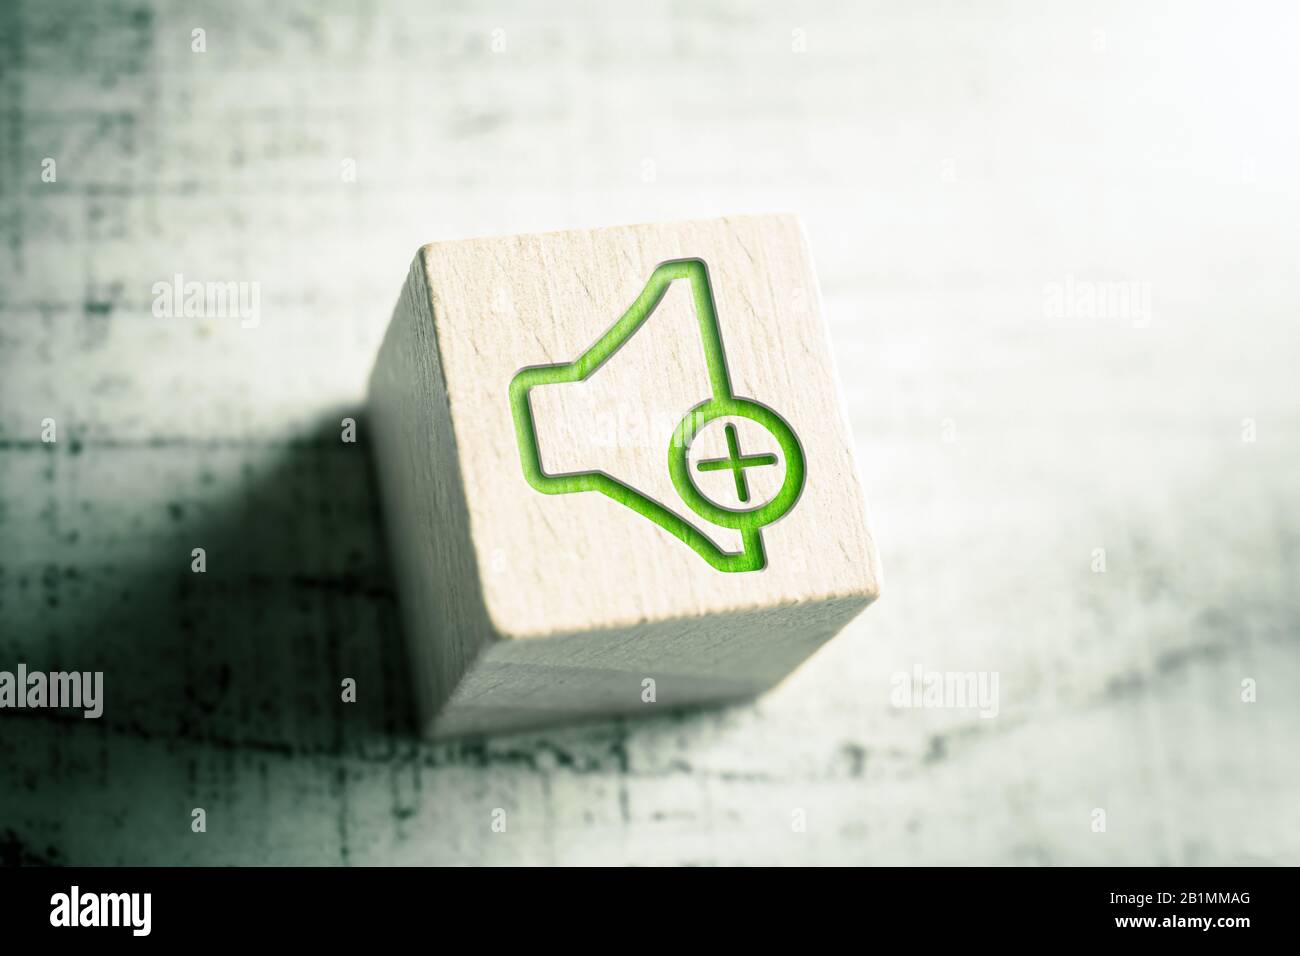 Volume Up Icon On A Wooden Block On A Table Stock Photo